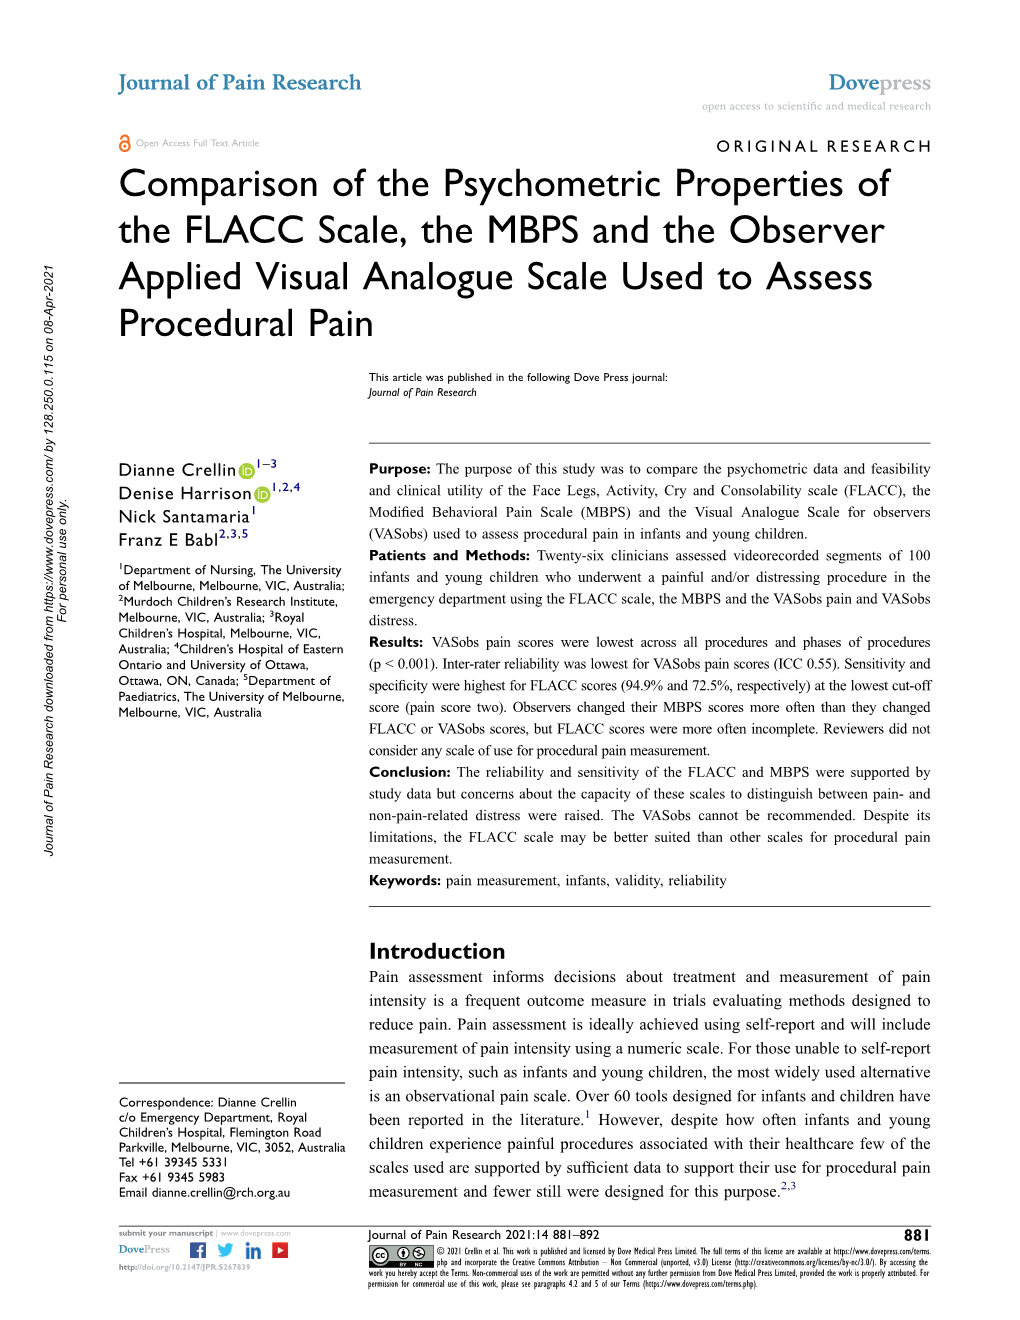 Comparison of the Psychometric Properties of the FLACC Scale, the MBPS and the Observer Applied Visual Analogue Scale Used to Assess Procedural Pain